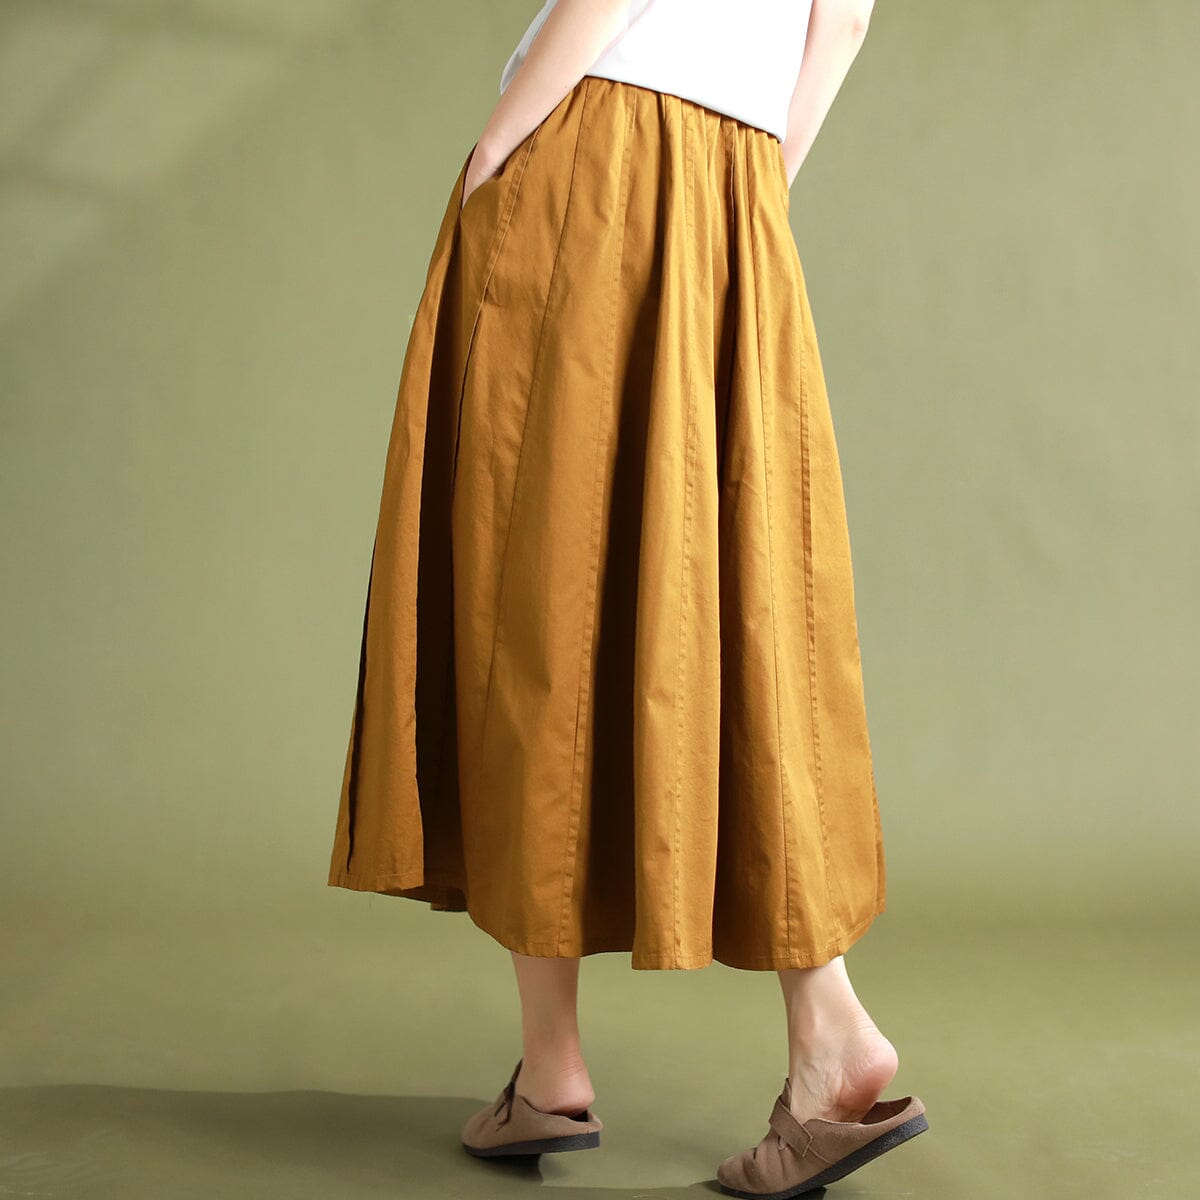 Summer Solid Casual Patchwork Cotton Skirt